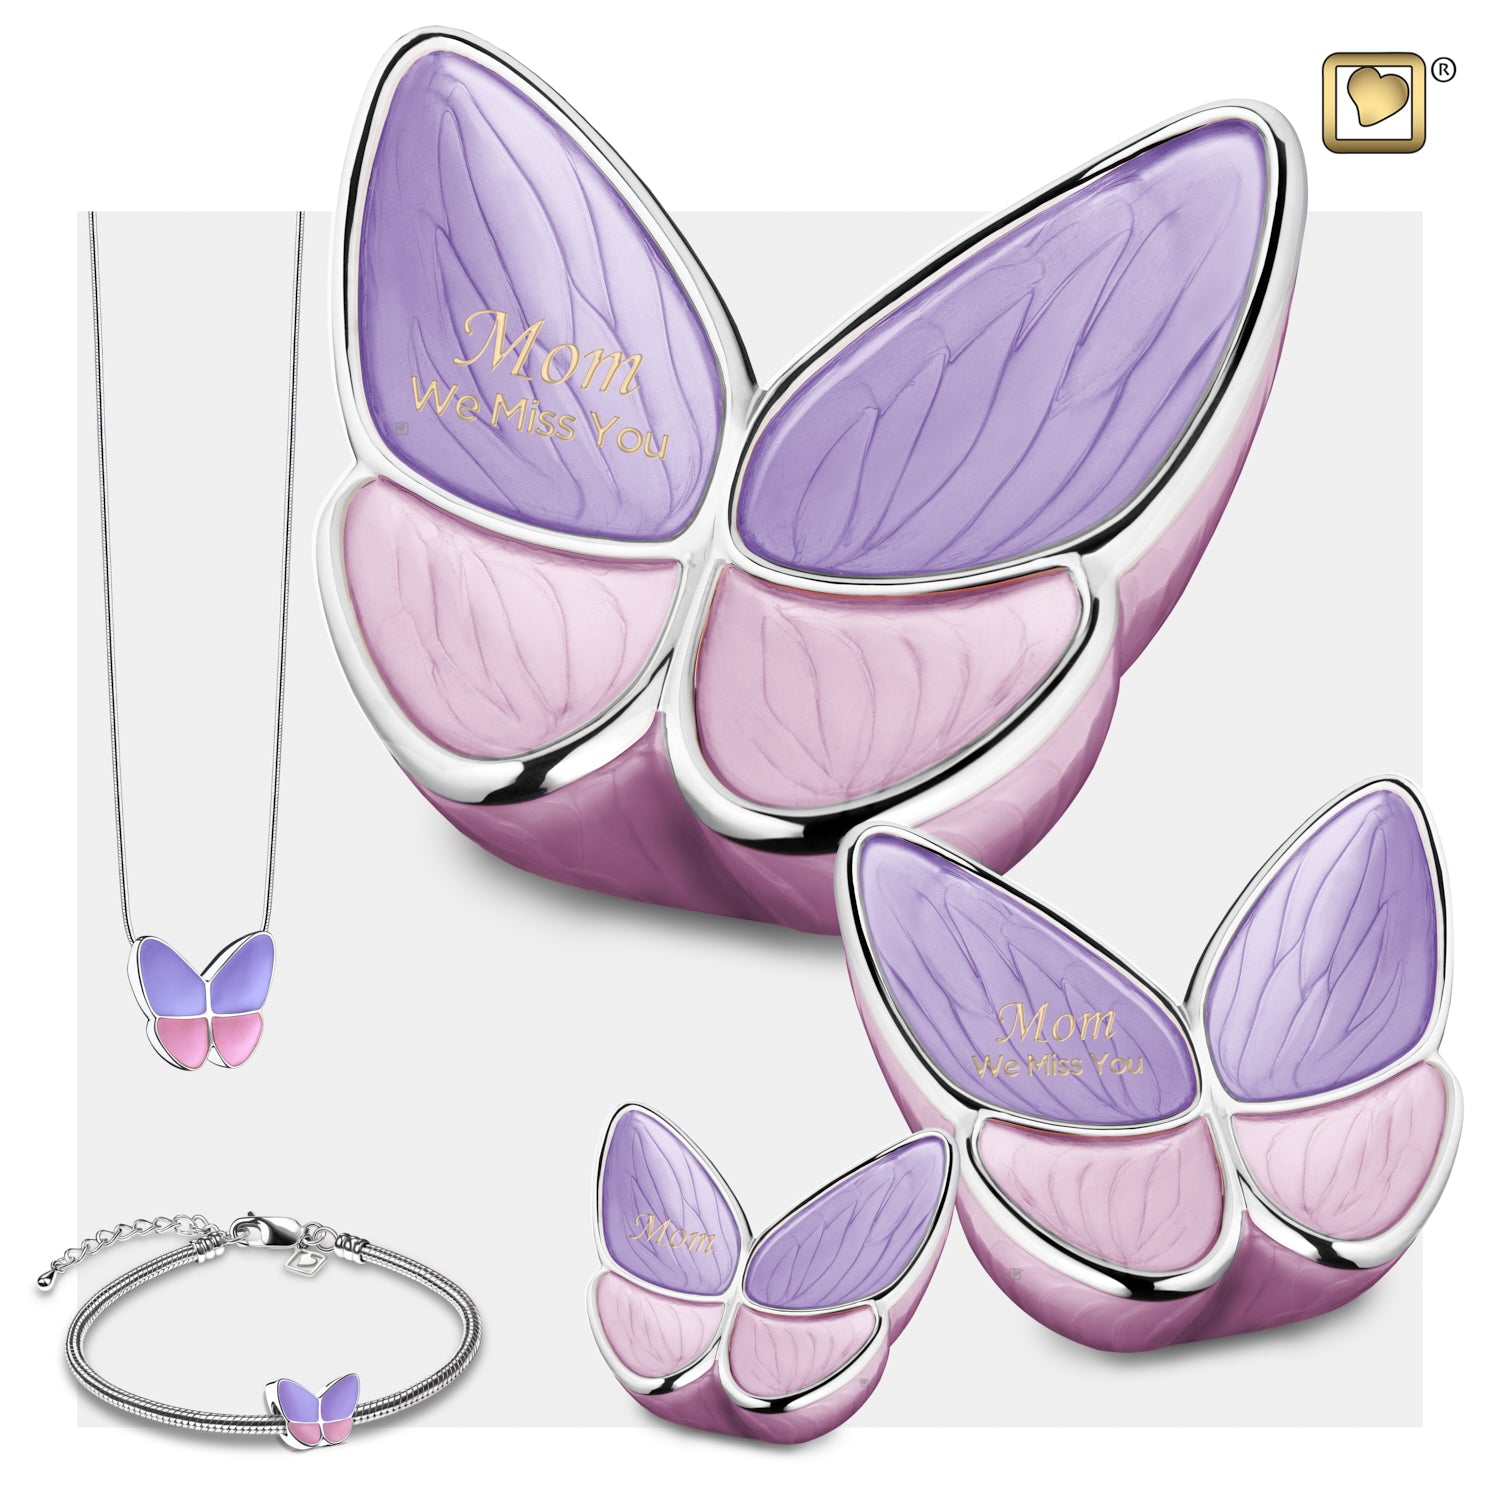 Medium Wings of Hope Butterfly Lavender Cremation Urn